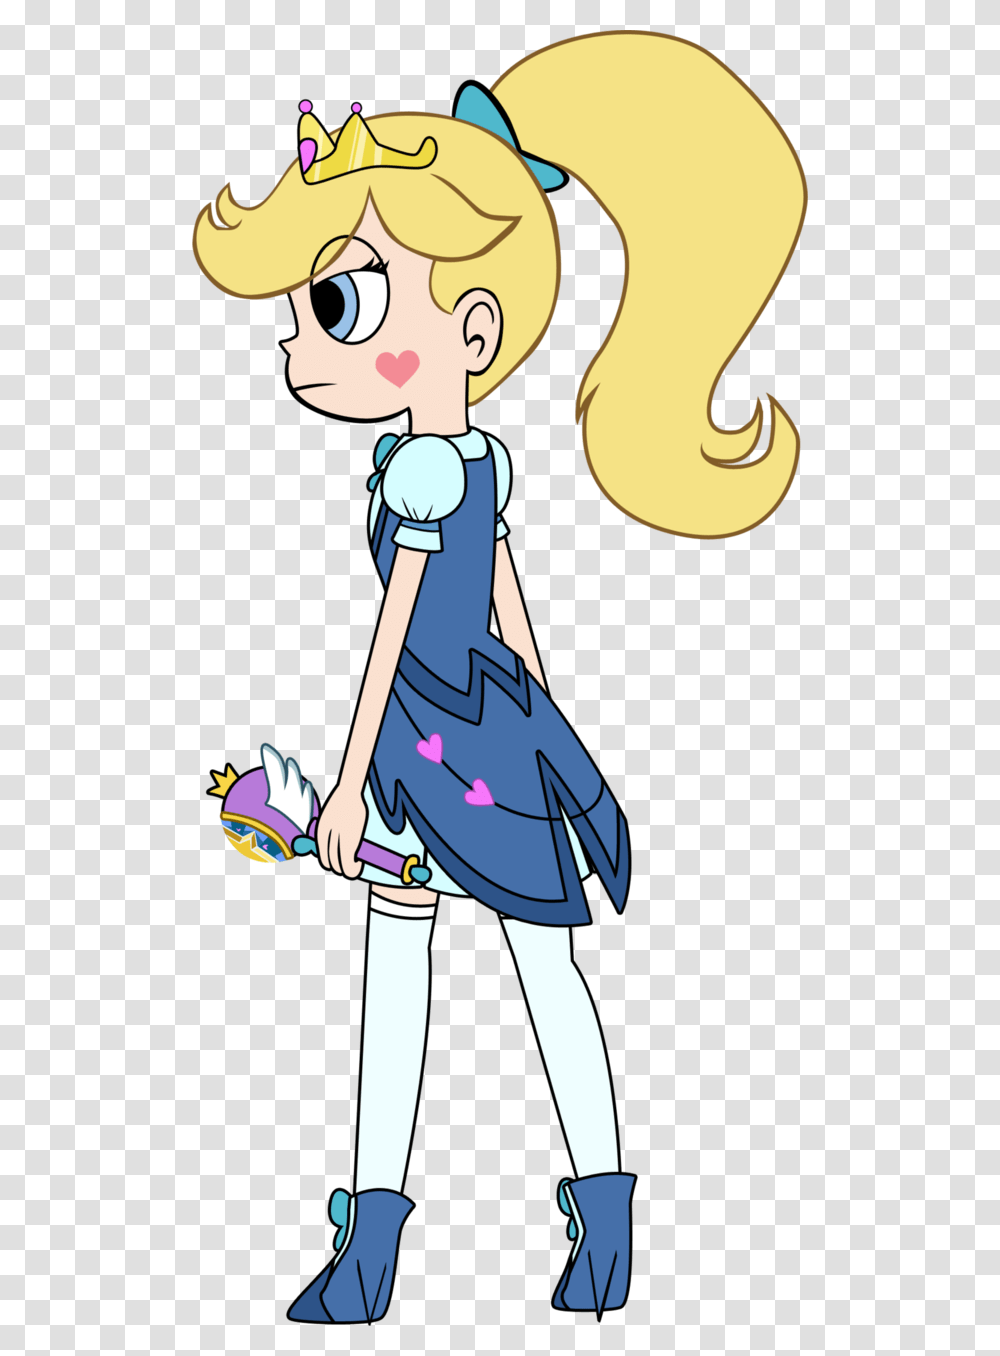 Royalty Star Butterfly By Aerenarie Dibujos De La Star Butterfly, Person, Outdoors, Cleaning Transparent Png